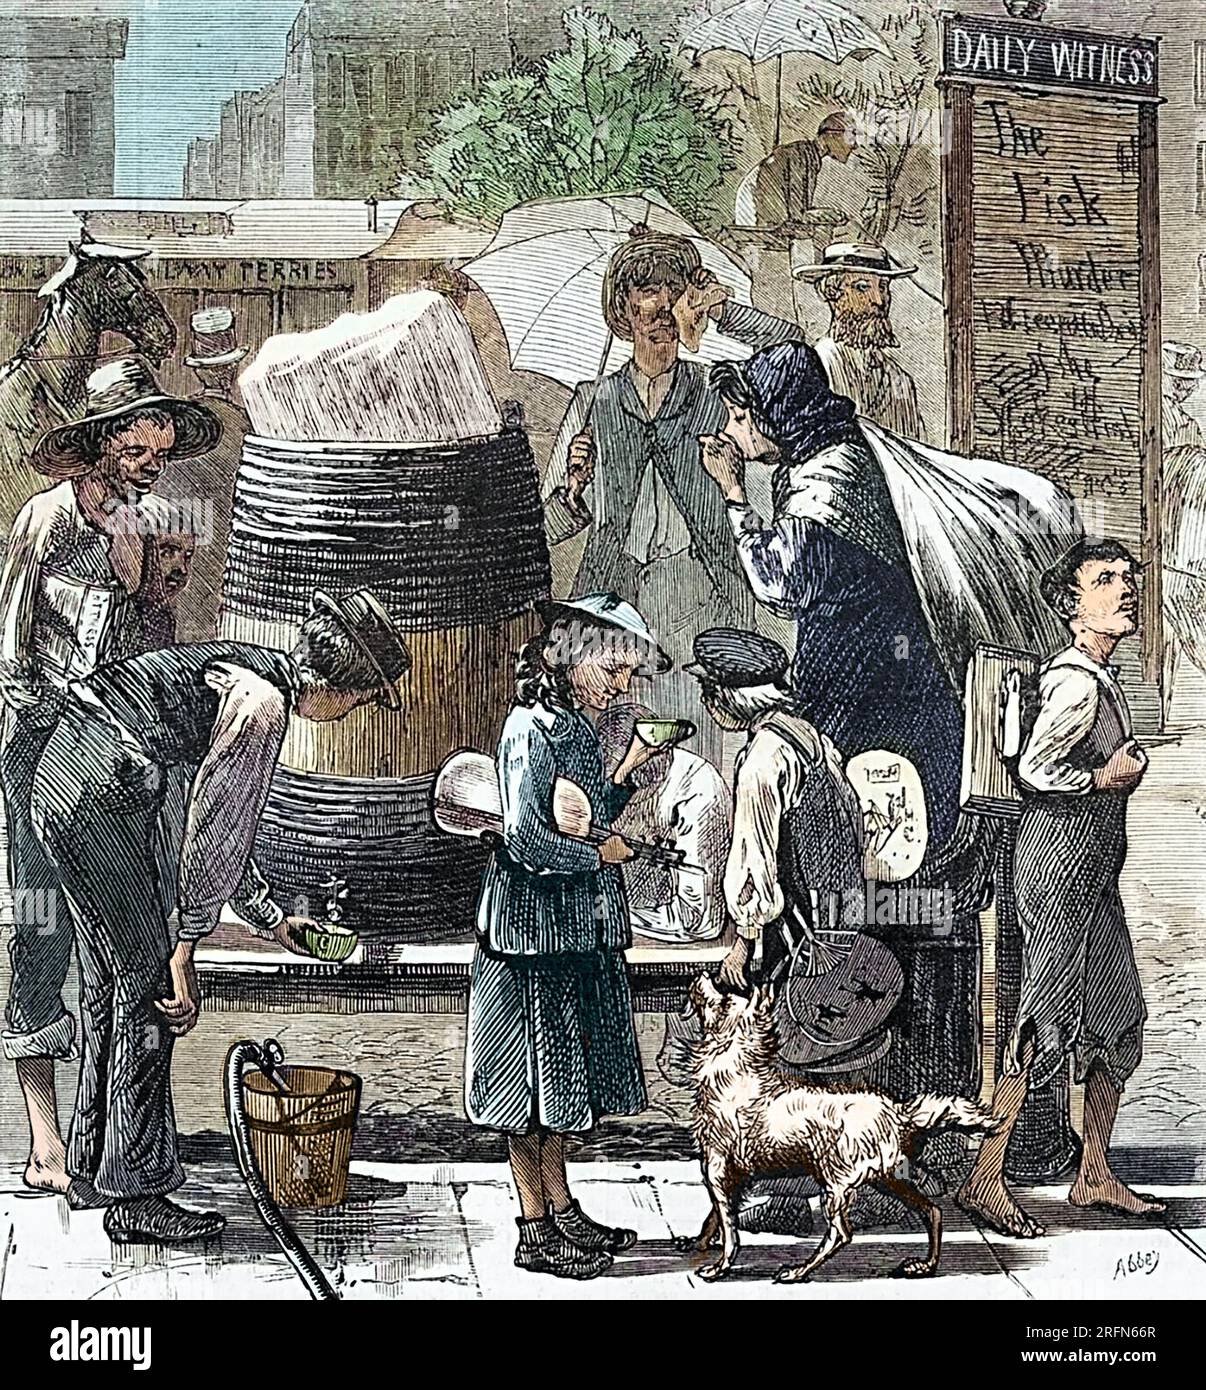 Distributing ice water in Printing House Square, New York City, during a summer heat wave. Illustration, Harper's Weekly, E. A. Abbey, July 27, 1872. Colorized. Stock Photo